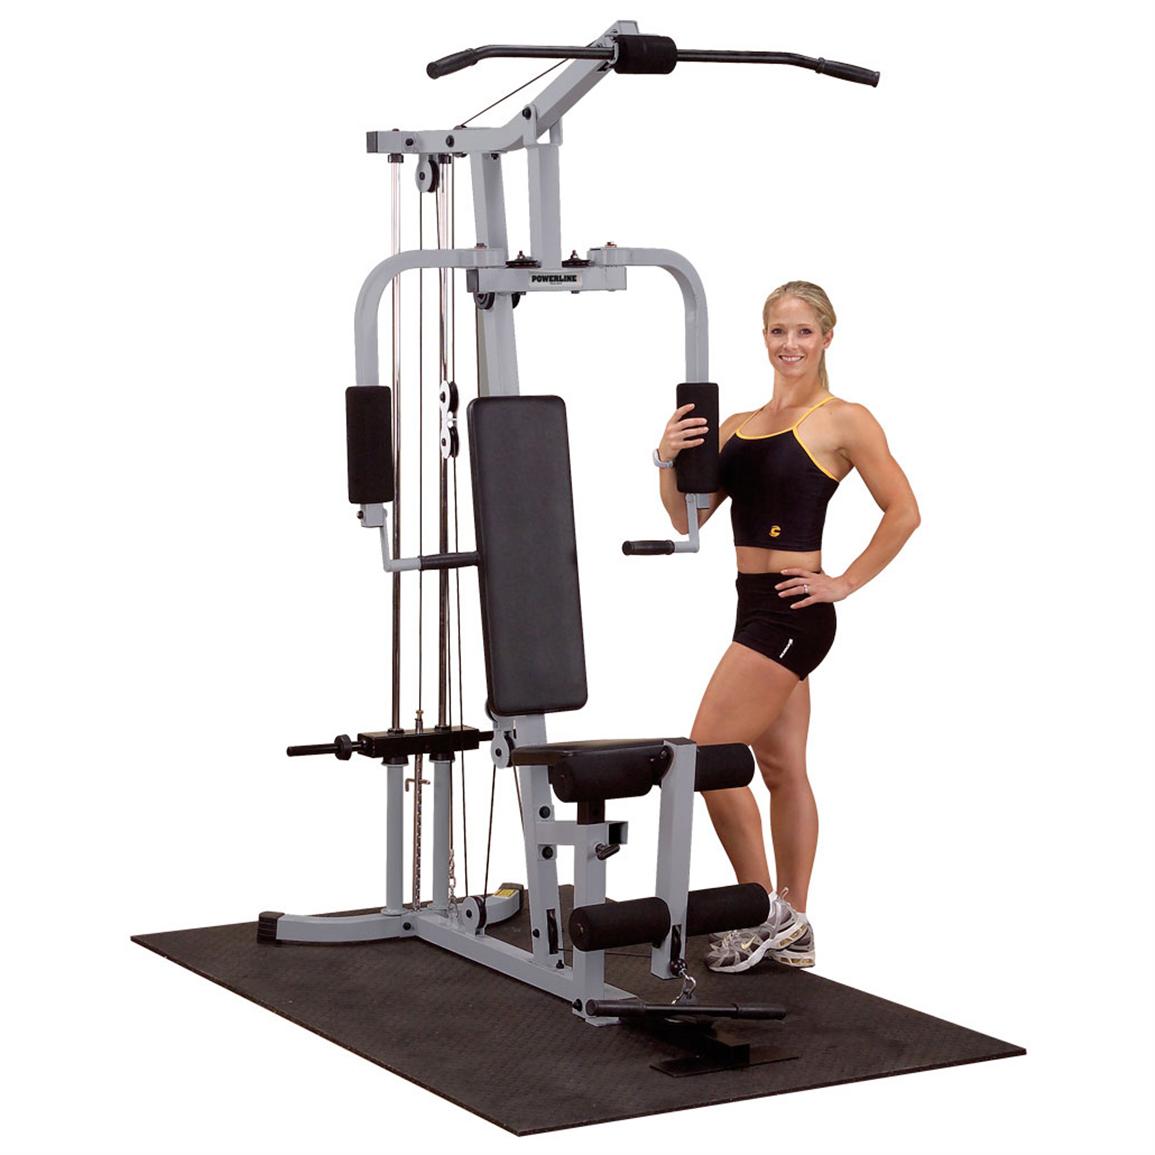 15 Minute Home Gym Equipment Canada Sale for Burn Fat fast